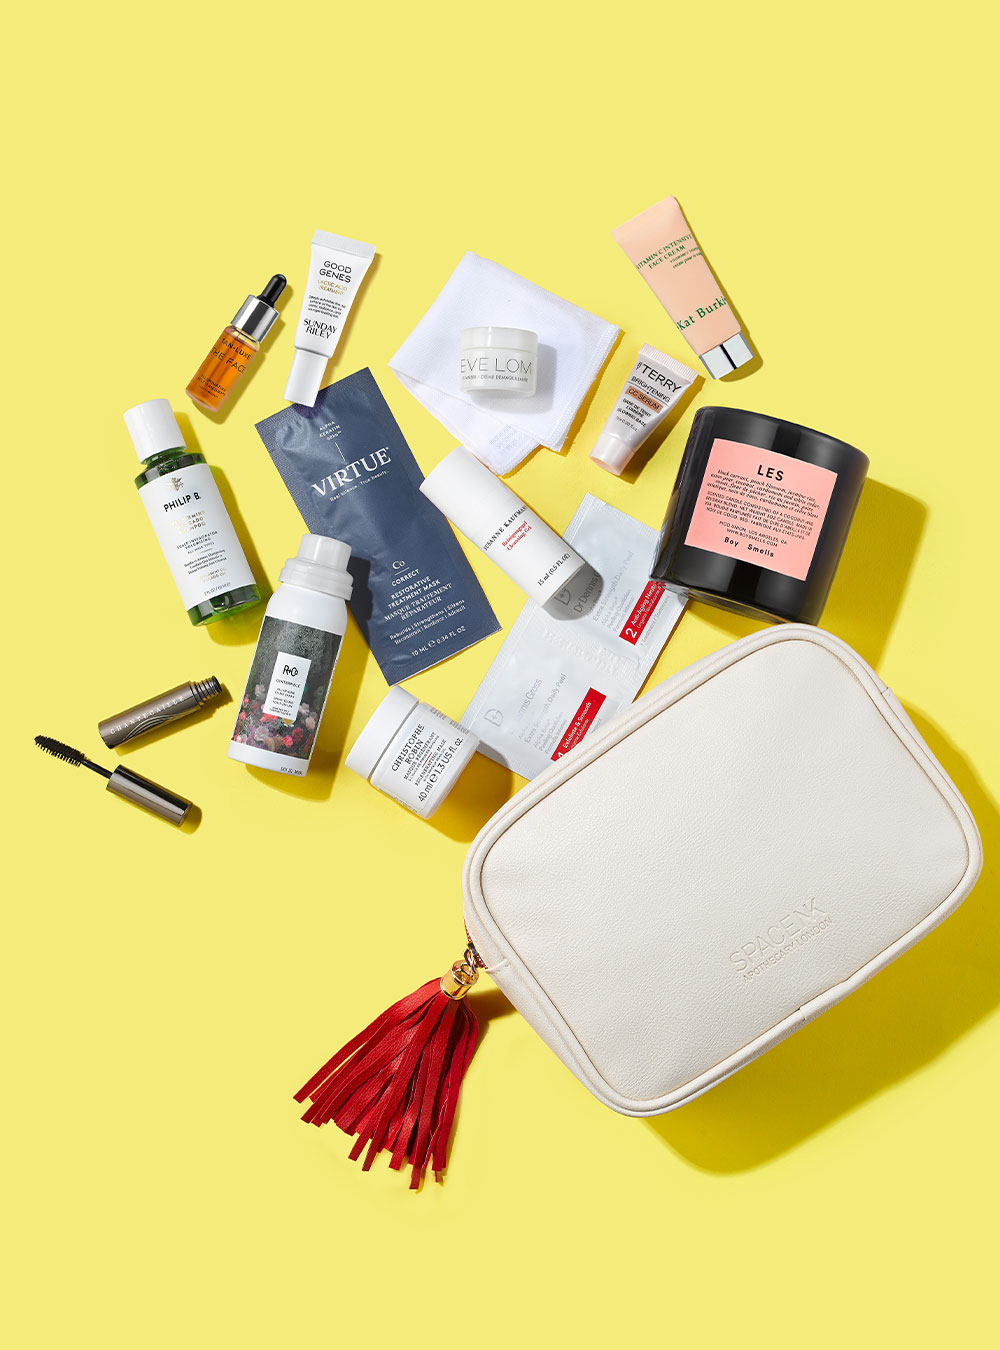 Multiple beauty products from Hudson's Bay are displayed on a light yellow background.